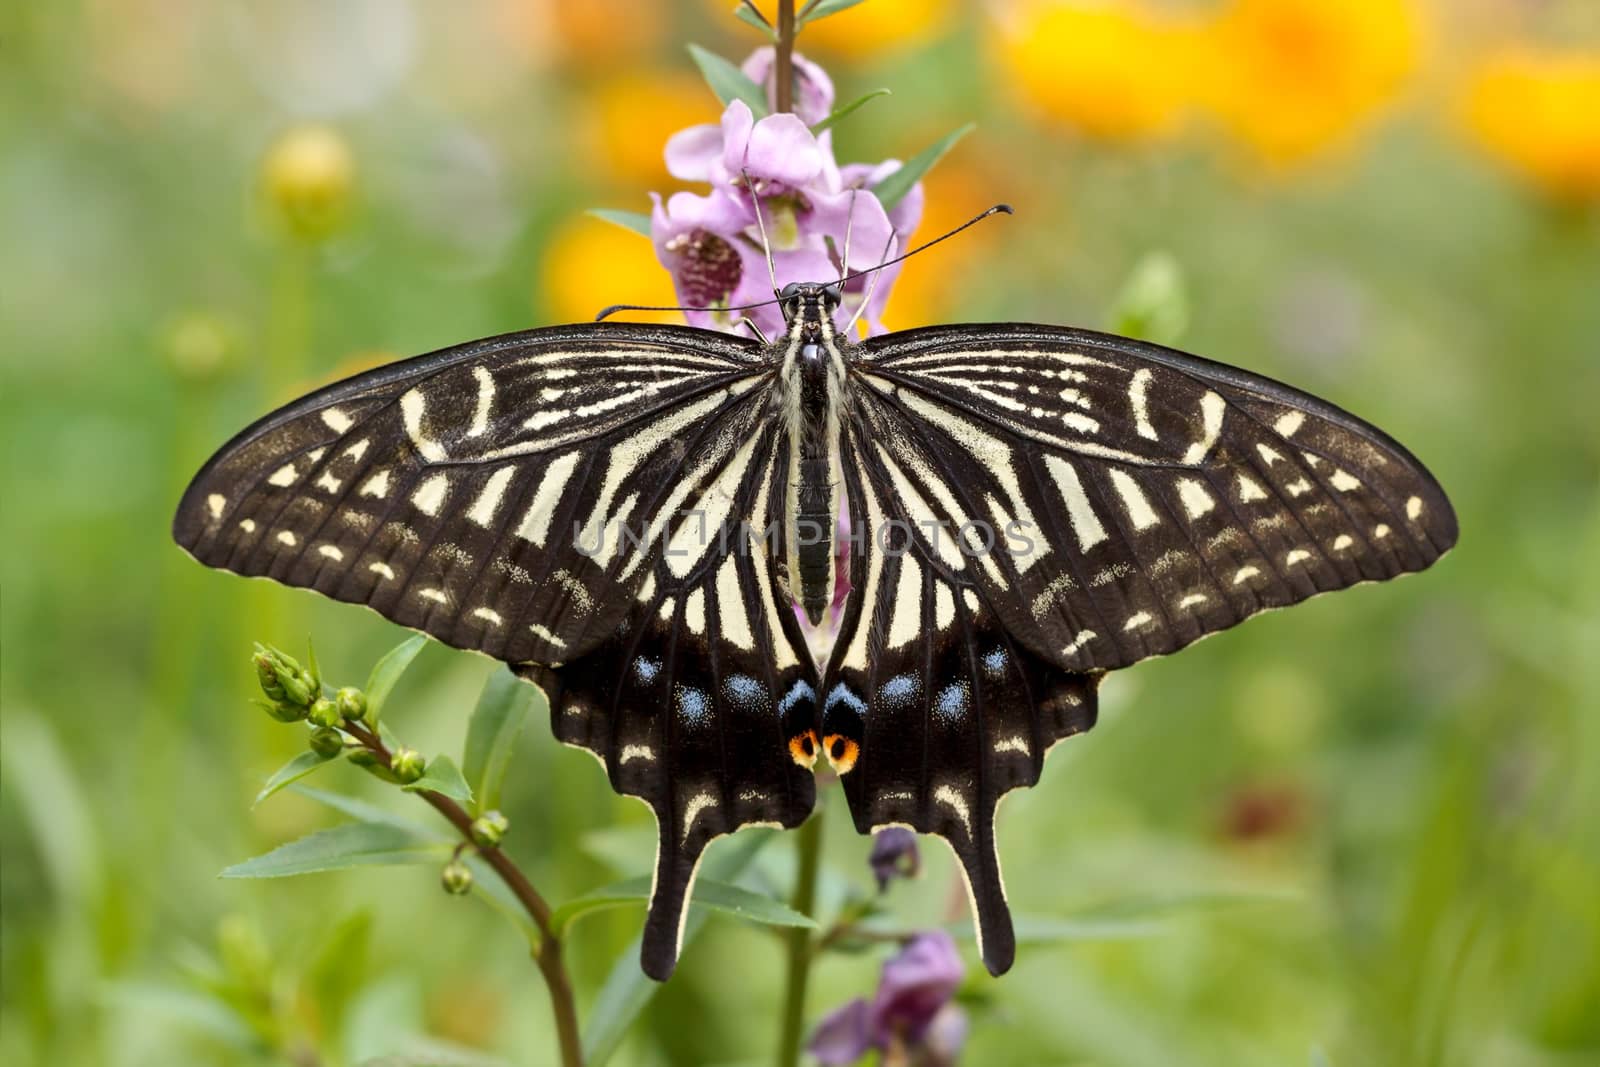 Swallowtail butterfly on a flower on blurry background